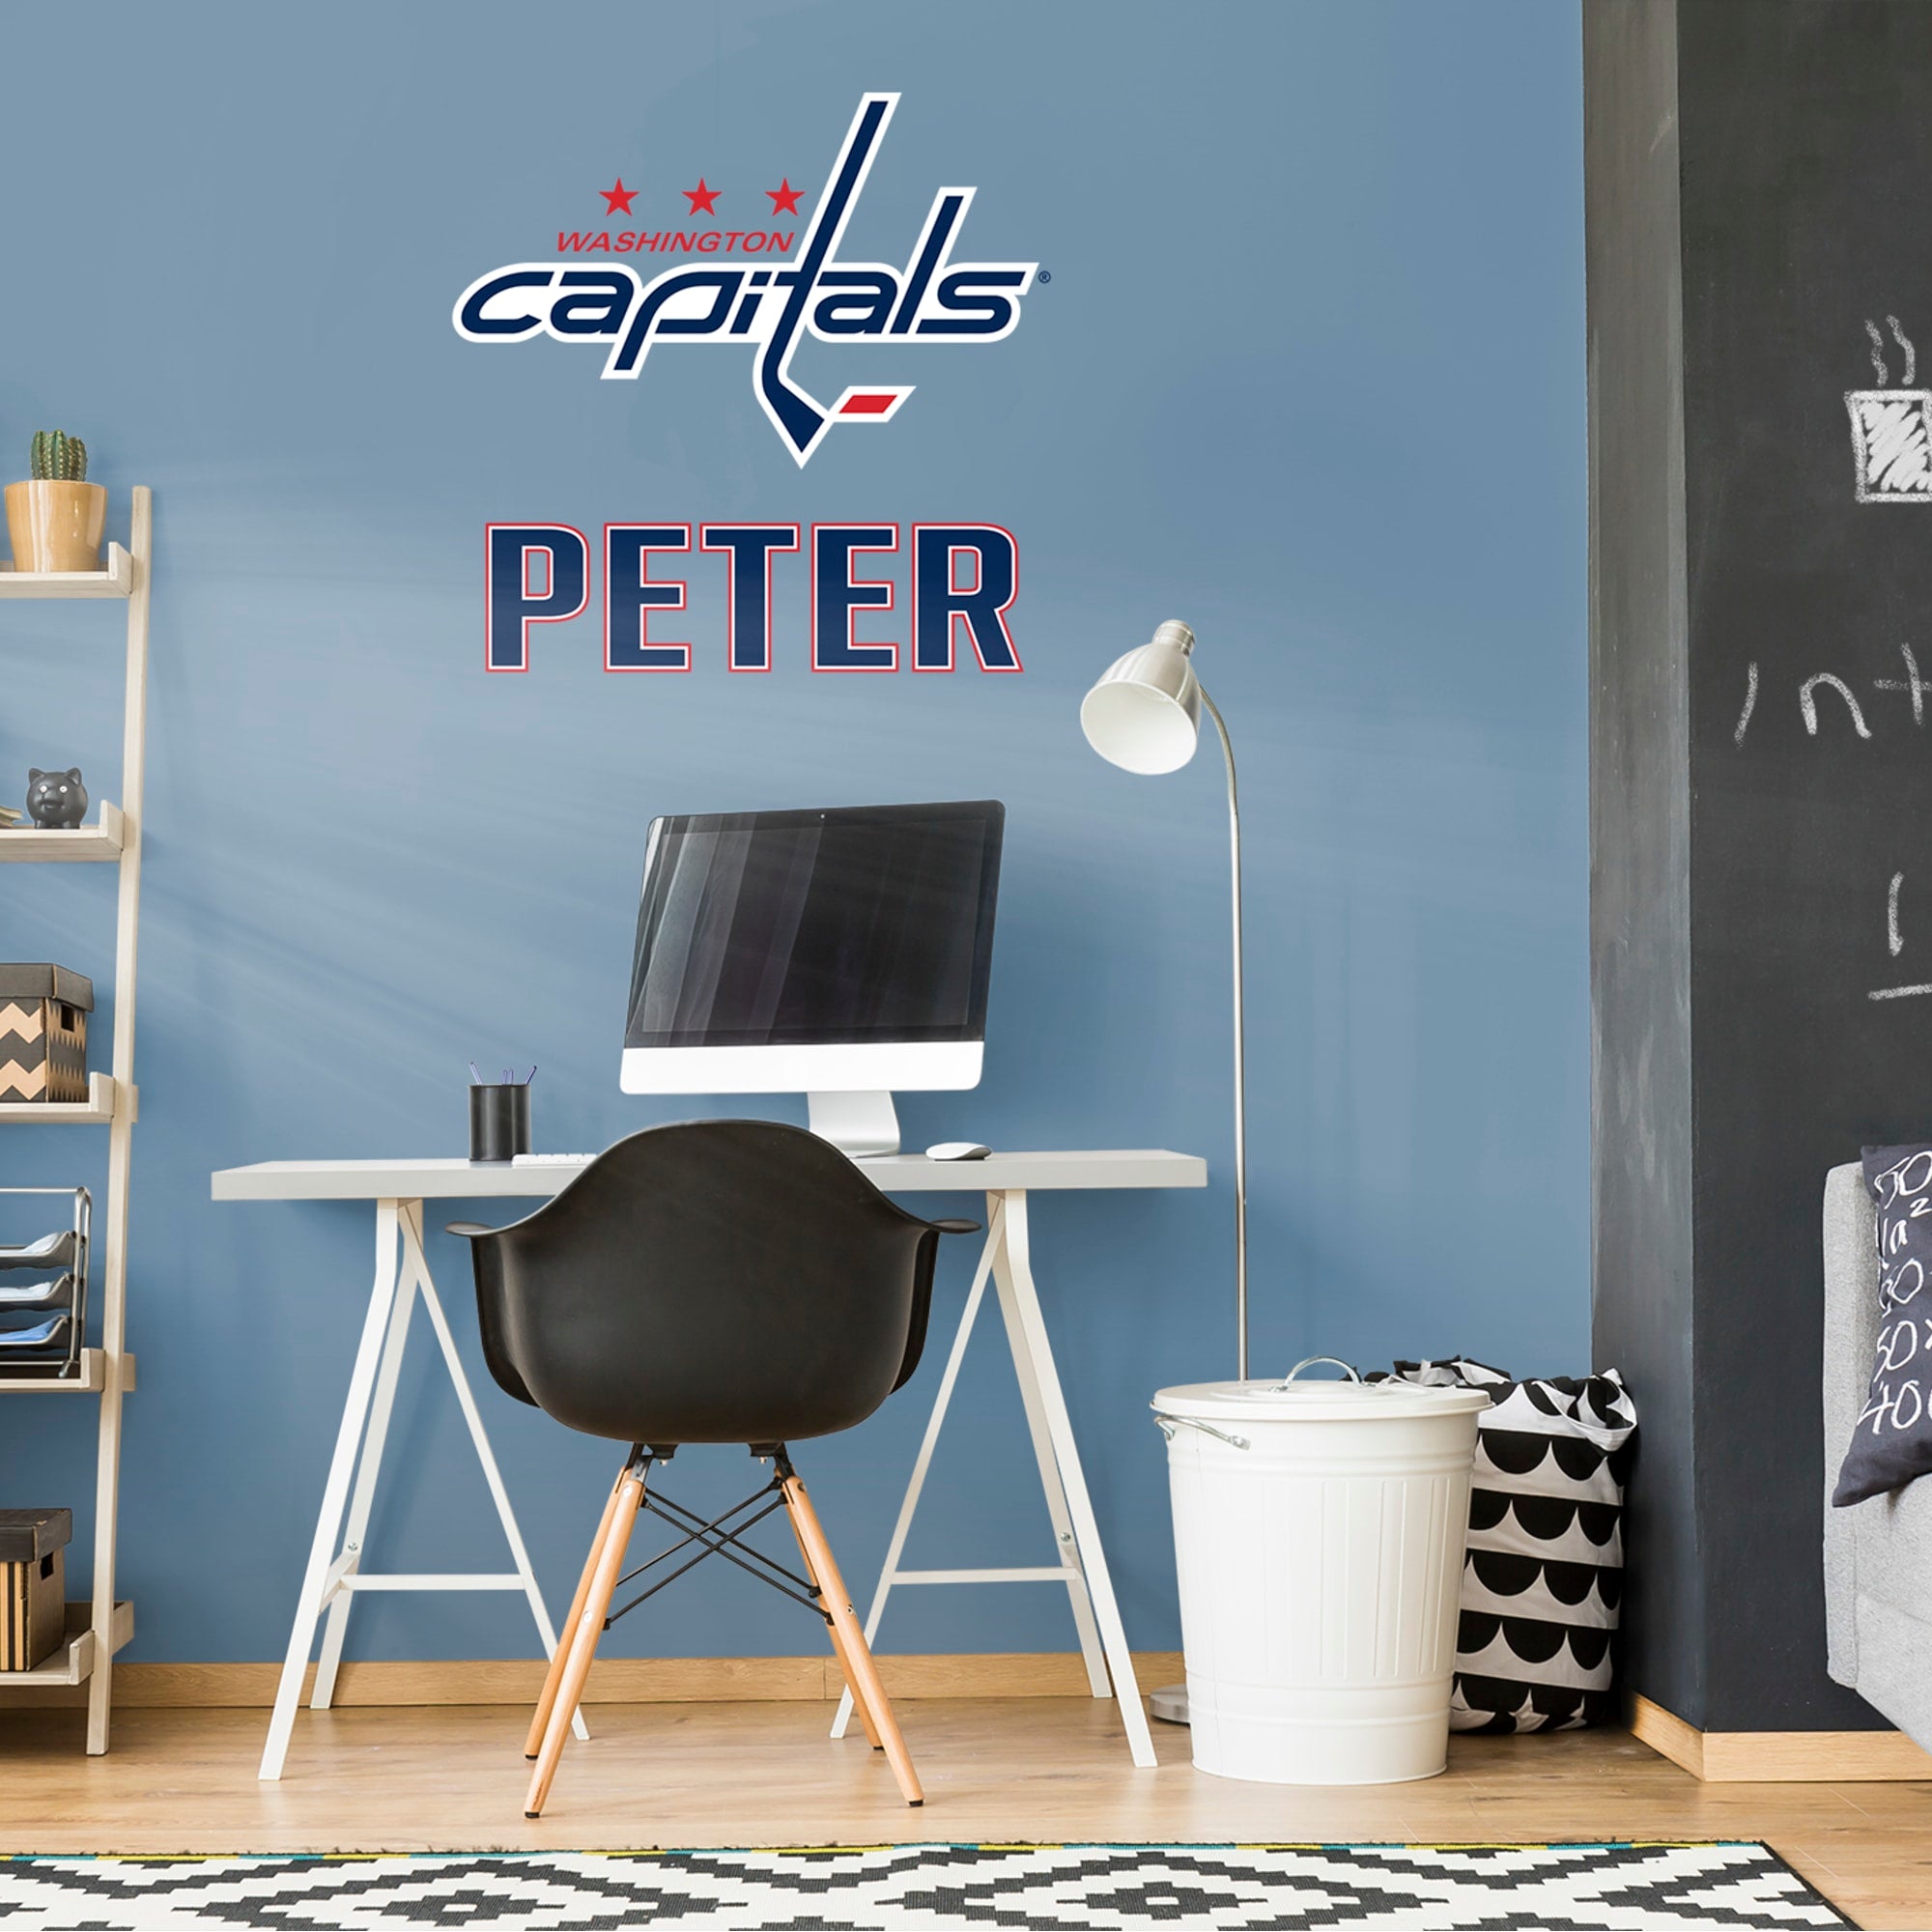 Washington Capitals: Stacked Personalized Name - Officially Licensed NHL Transfer Decal in Navy/Navy (39.5"W x 52"H) by Fathead